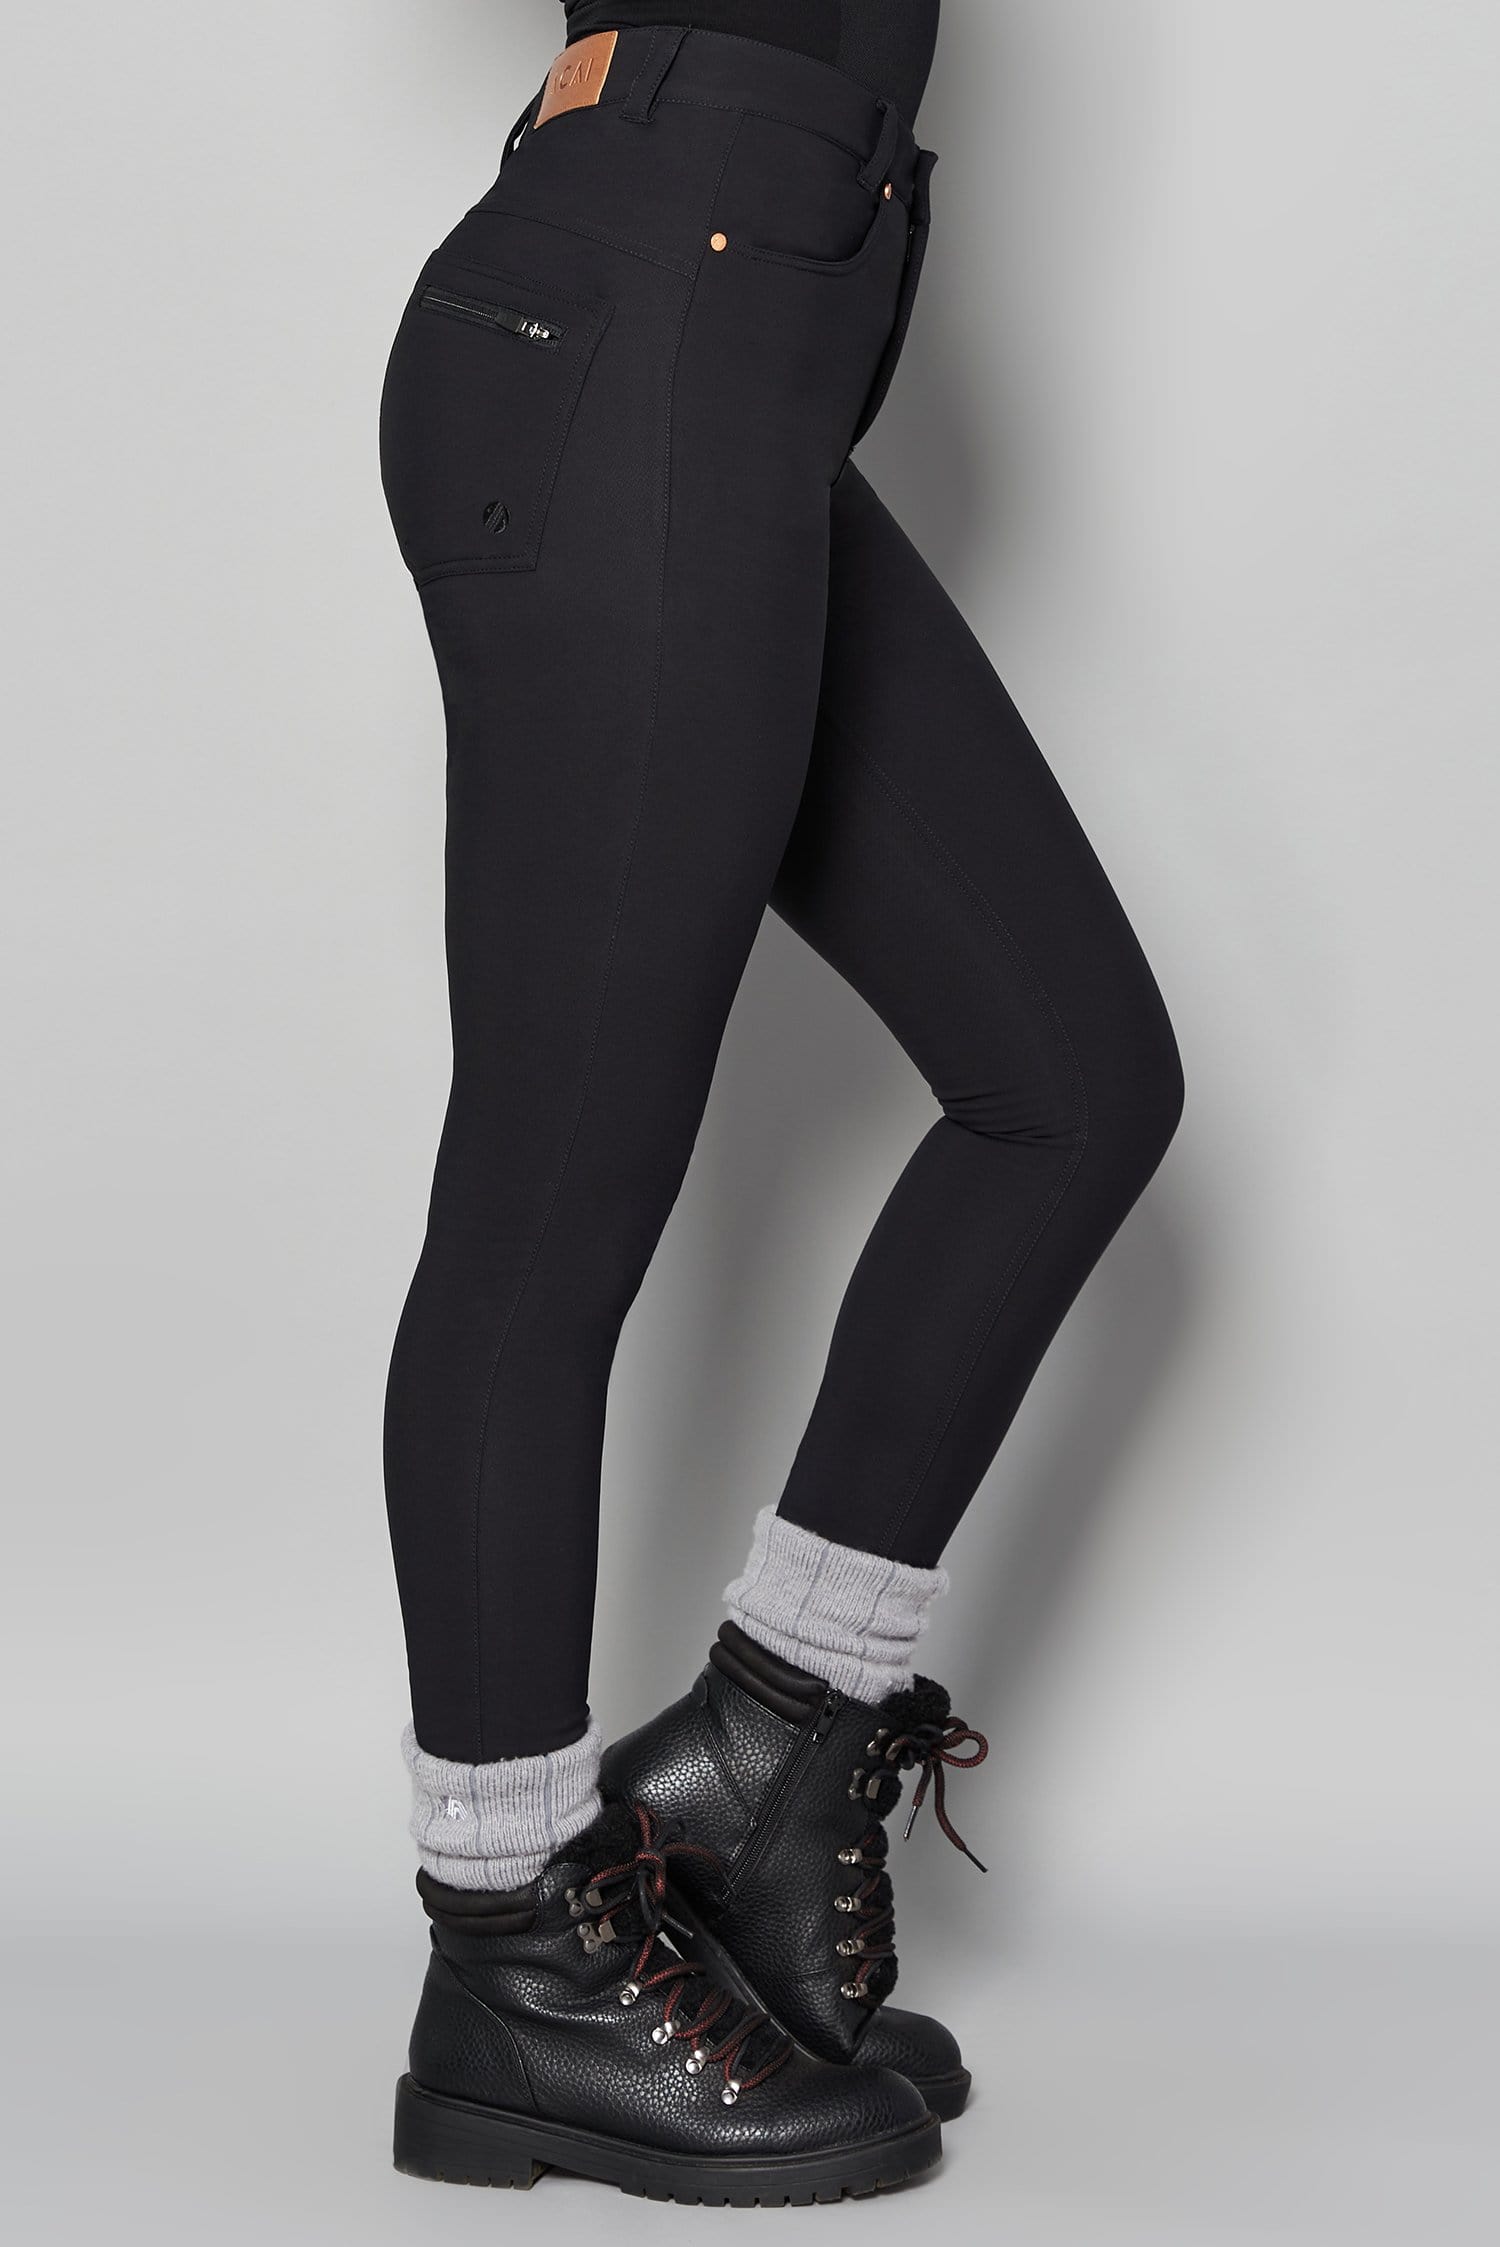 Thermal Skinny Outdoor Trousers - Black - 28r / Uk10 - Womens - Acai Outdoorwear